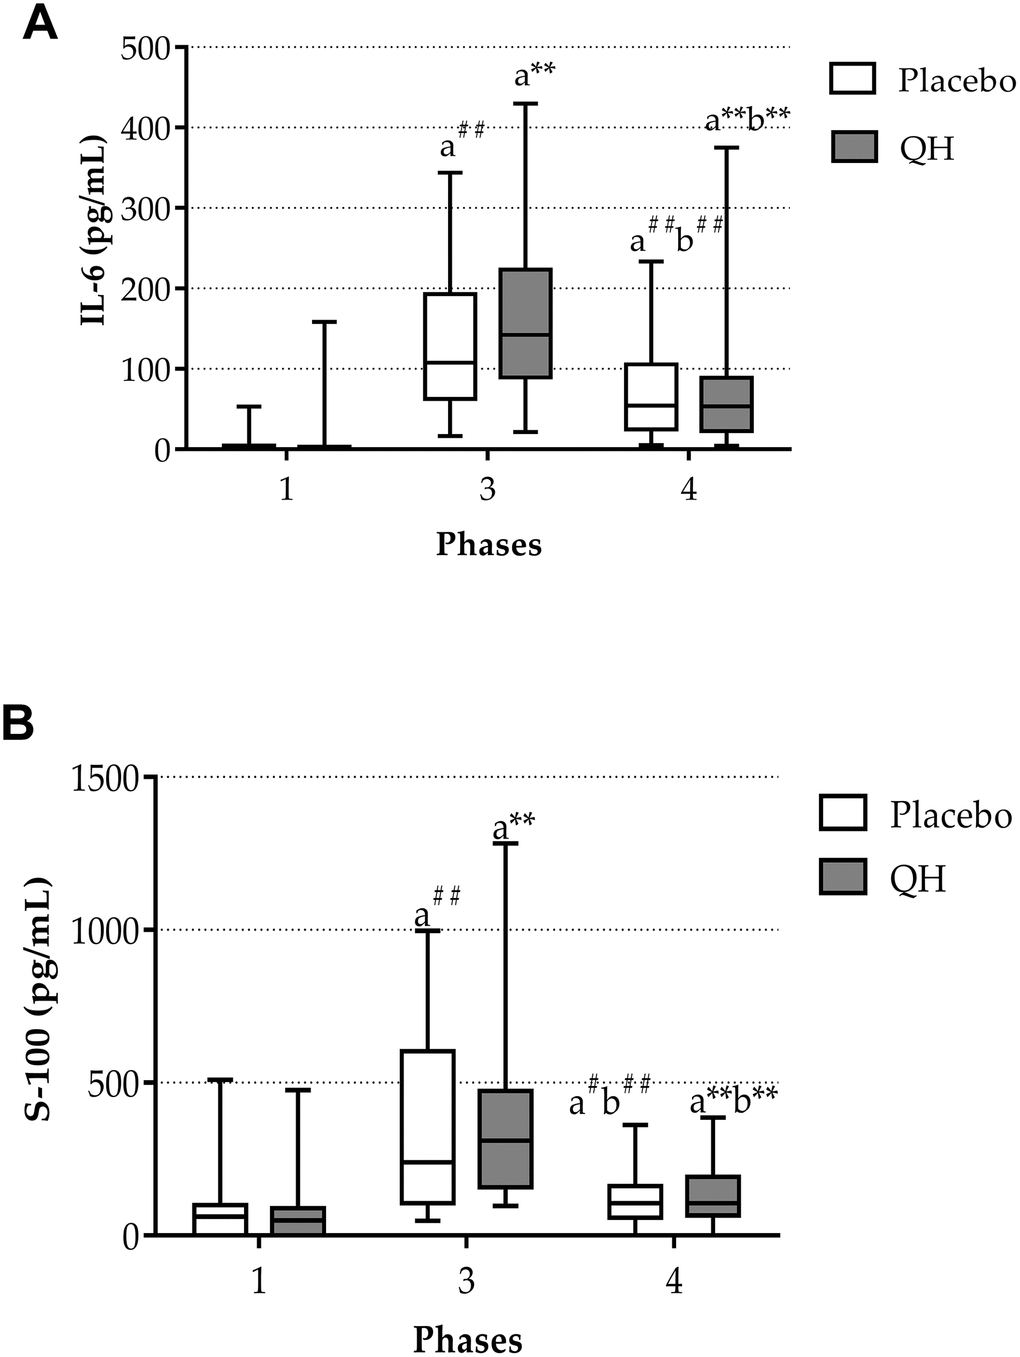 IL-6 (A) and S-100 protein (B) plasma levels in placebo (white) and QH treated patients (grey) at phase 1, 3 and 4. ** p≤0.01, #p≤0.05 and ##p≤0.01 significance of differences in each experimental group in comparison with phase 1 (a) and 3 (b).